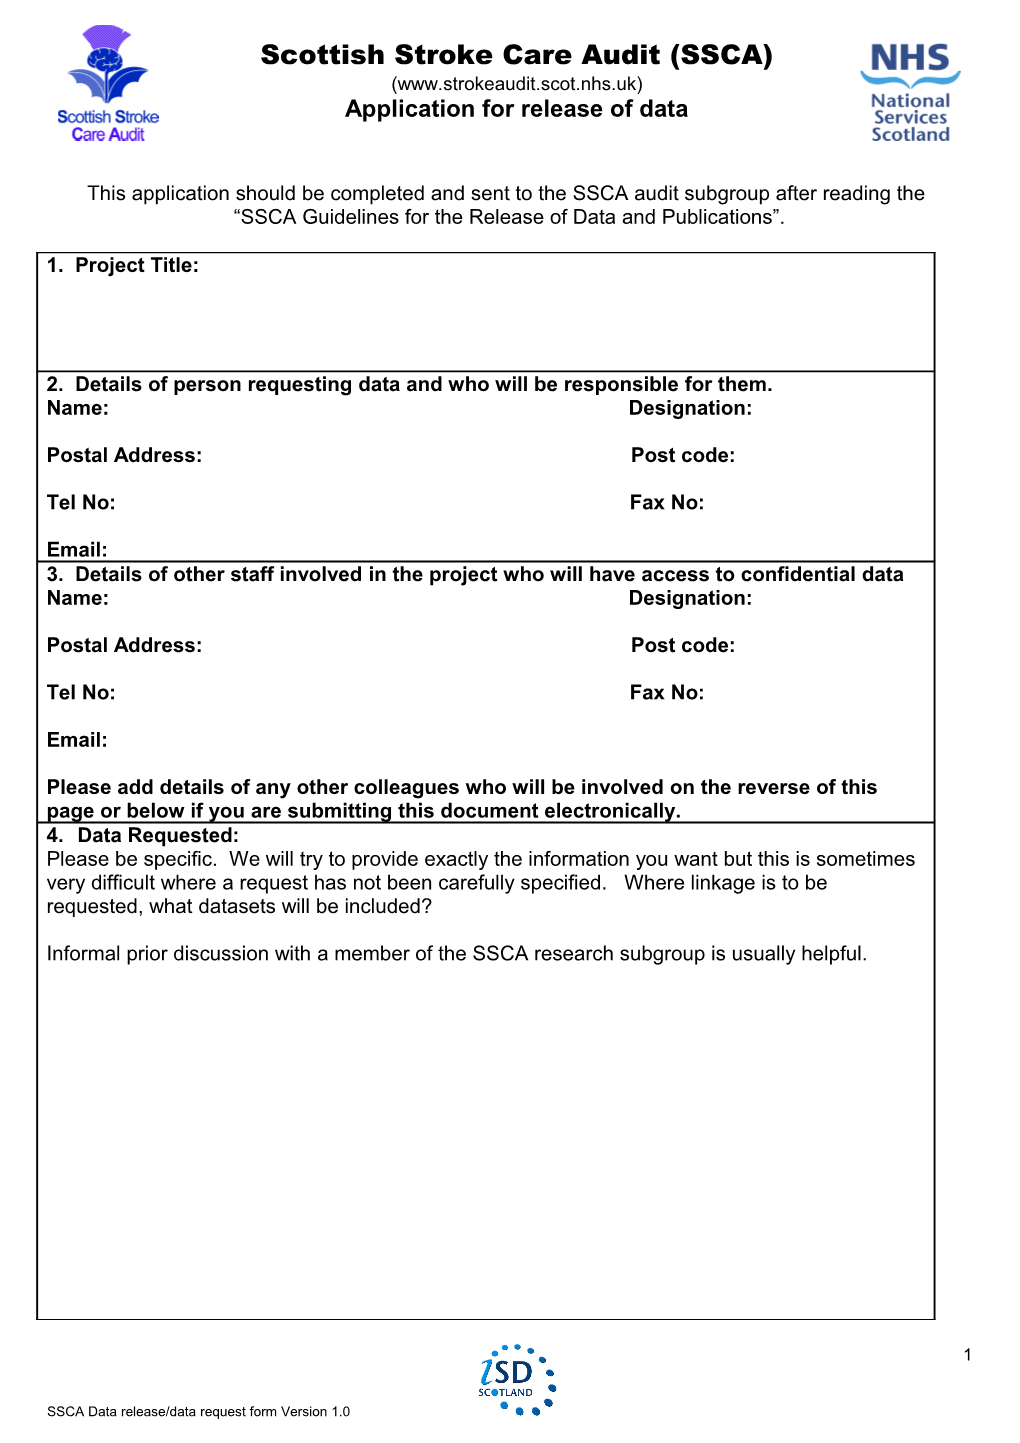 This Application Should Be Completed and Sent to the SSCA Audit Subgroup After Reading The